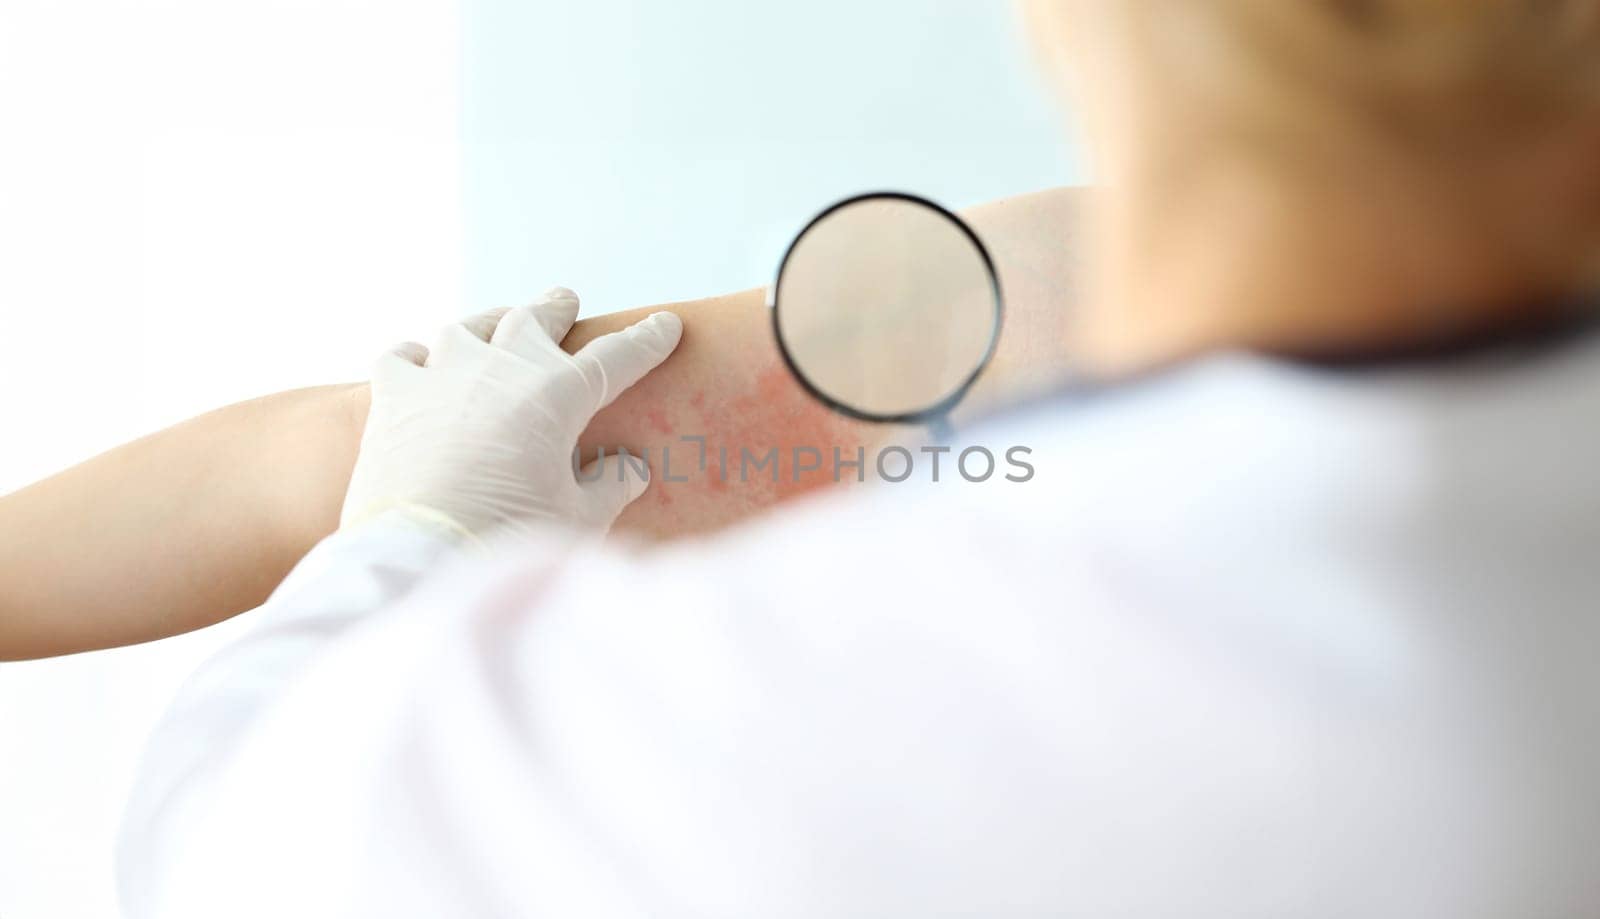 Focus on special magnifying glass used to precisely look at red rush on skin of suffering man with painful illness. Dermatology clinic advertisement concept. Blurred background